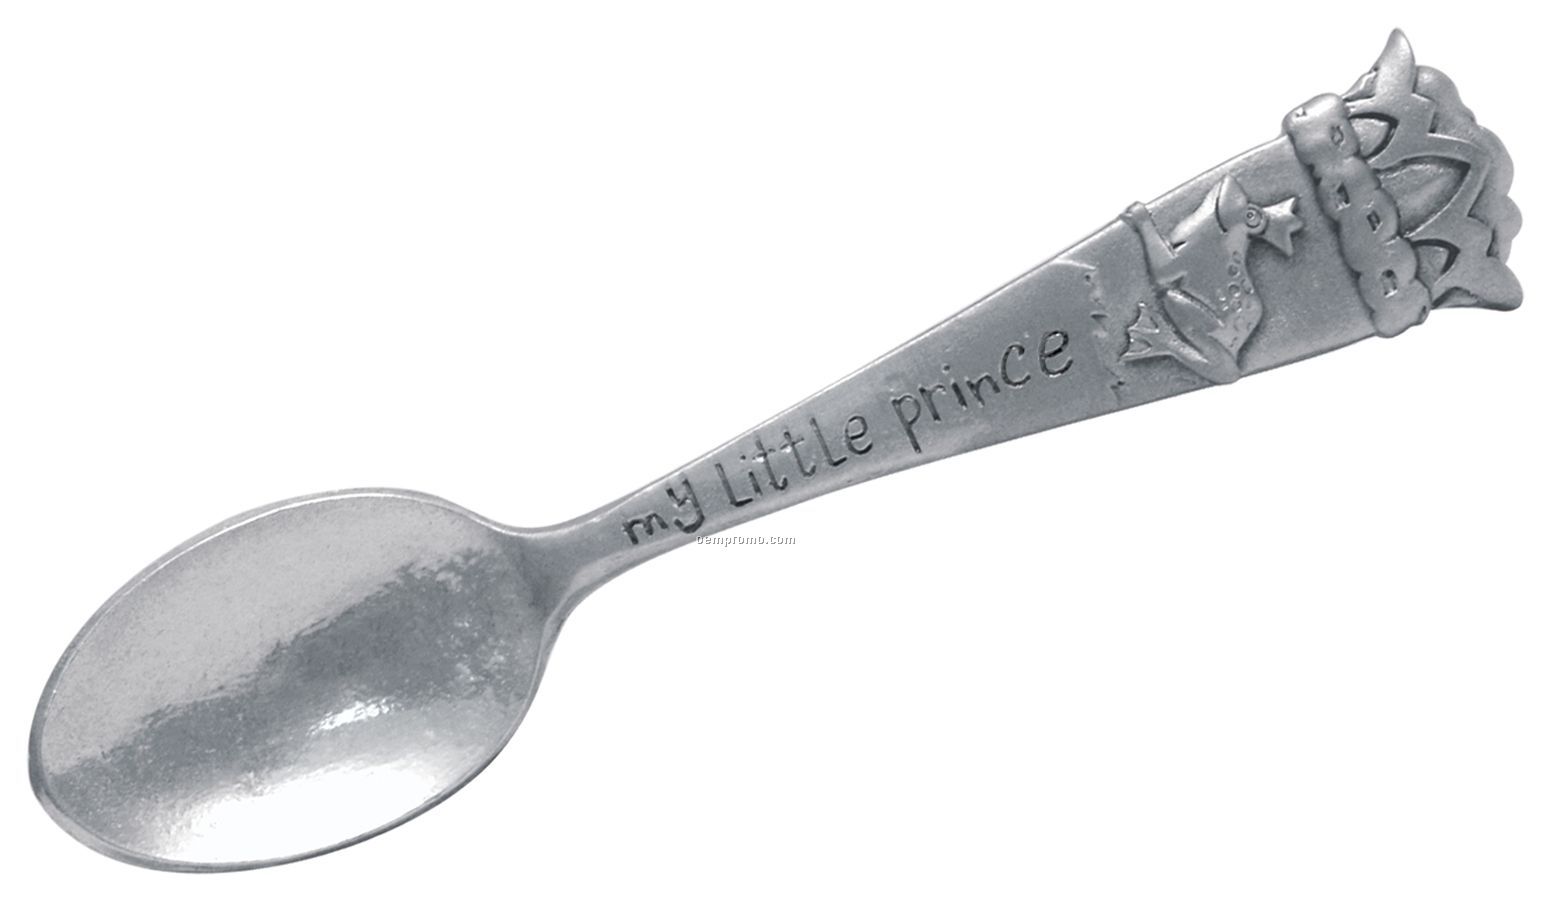 Prince Whimsey Spoon